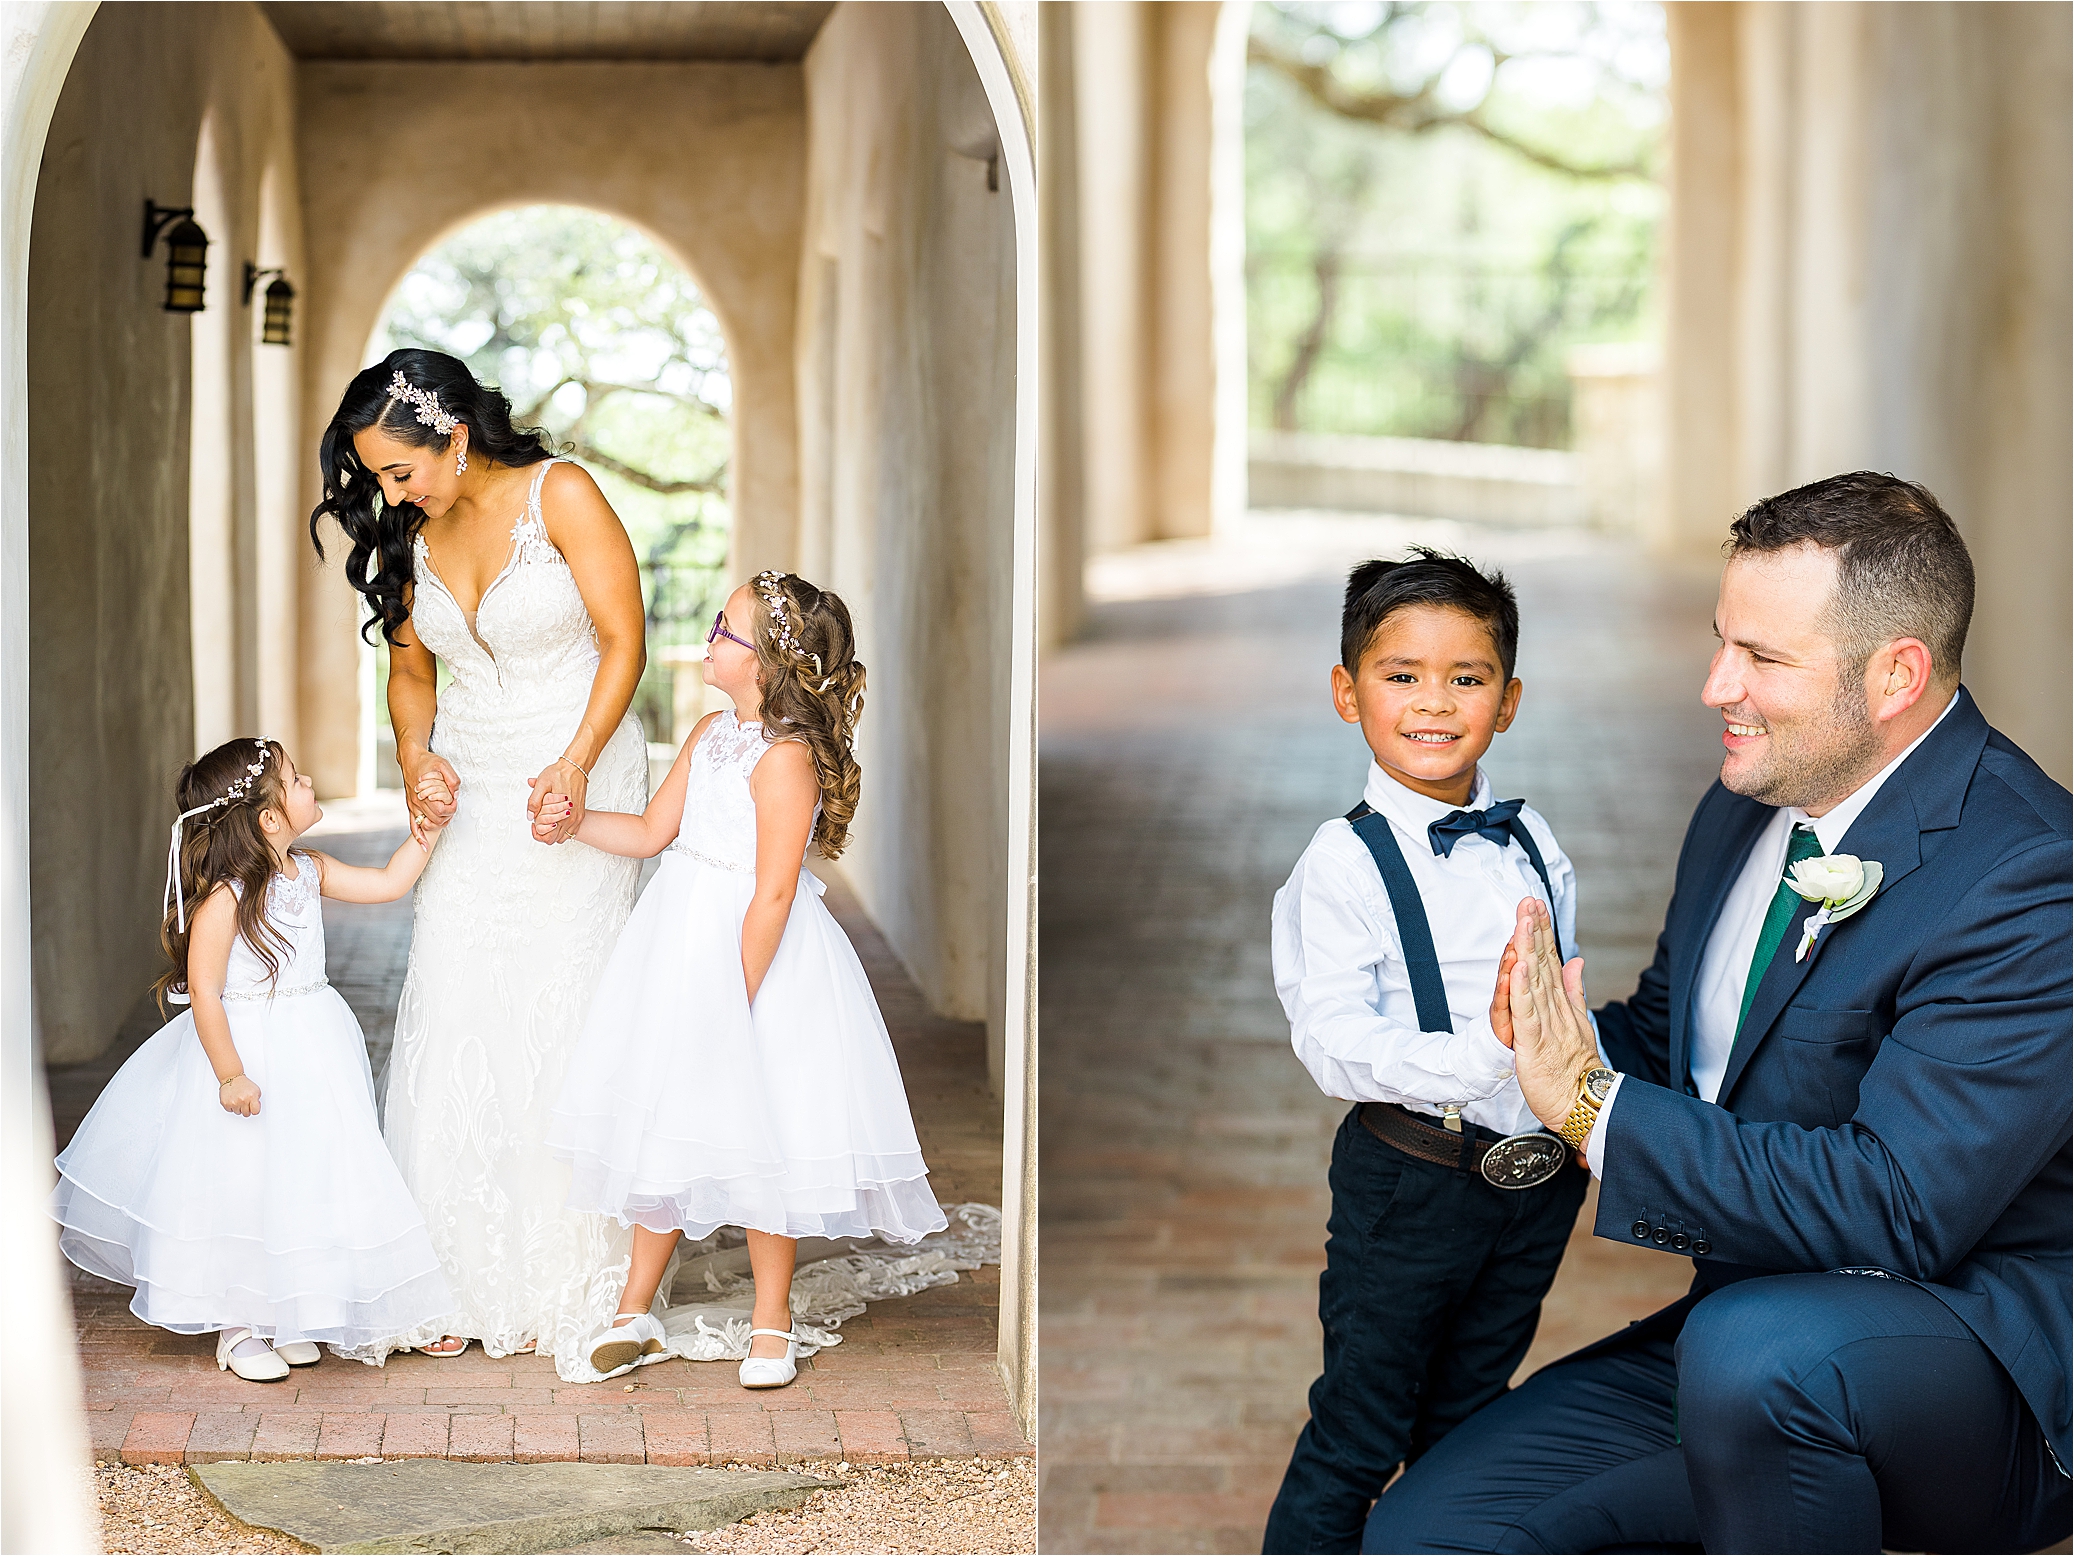 A groom high fives his ring bearer at Lost Mission, A mission-style wedding venue near San Antonio, Texas